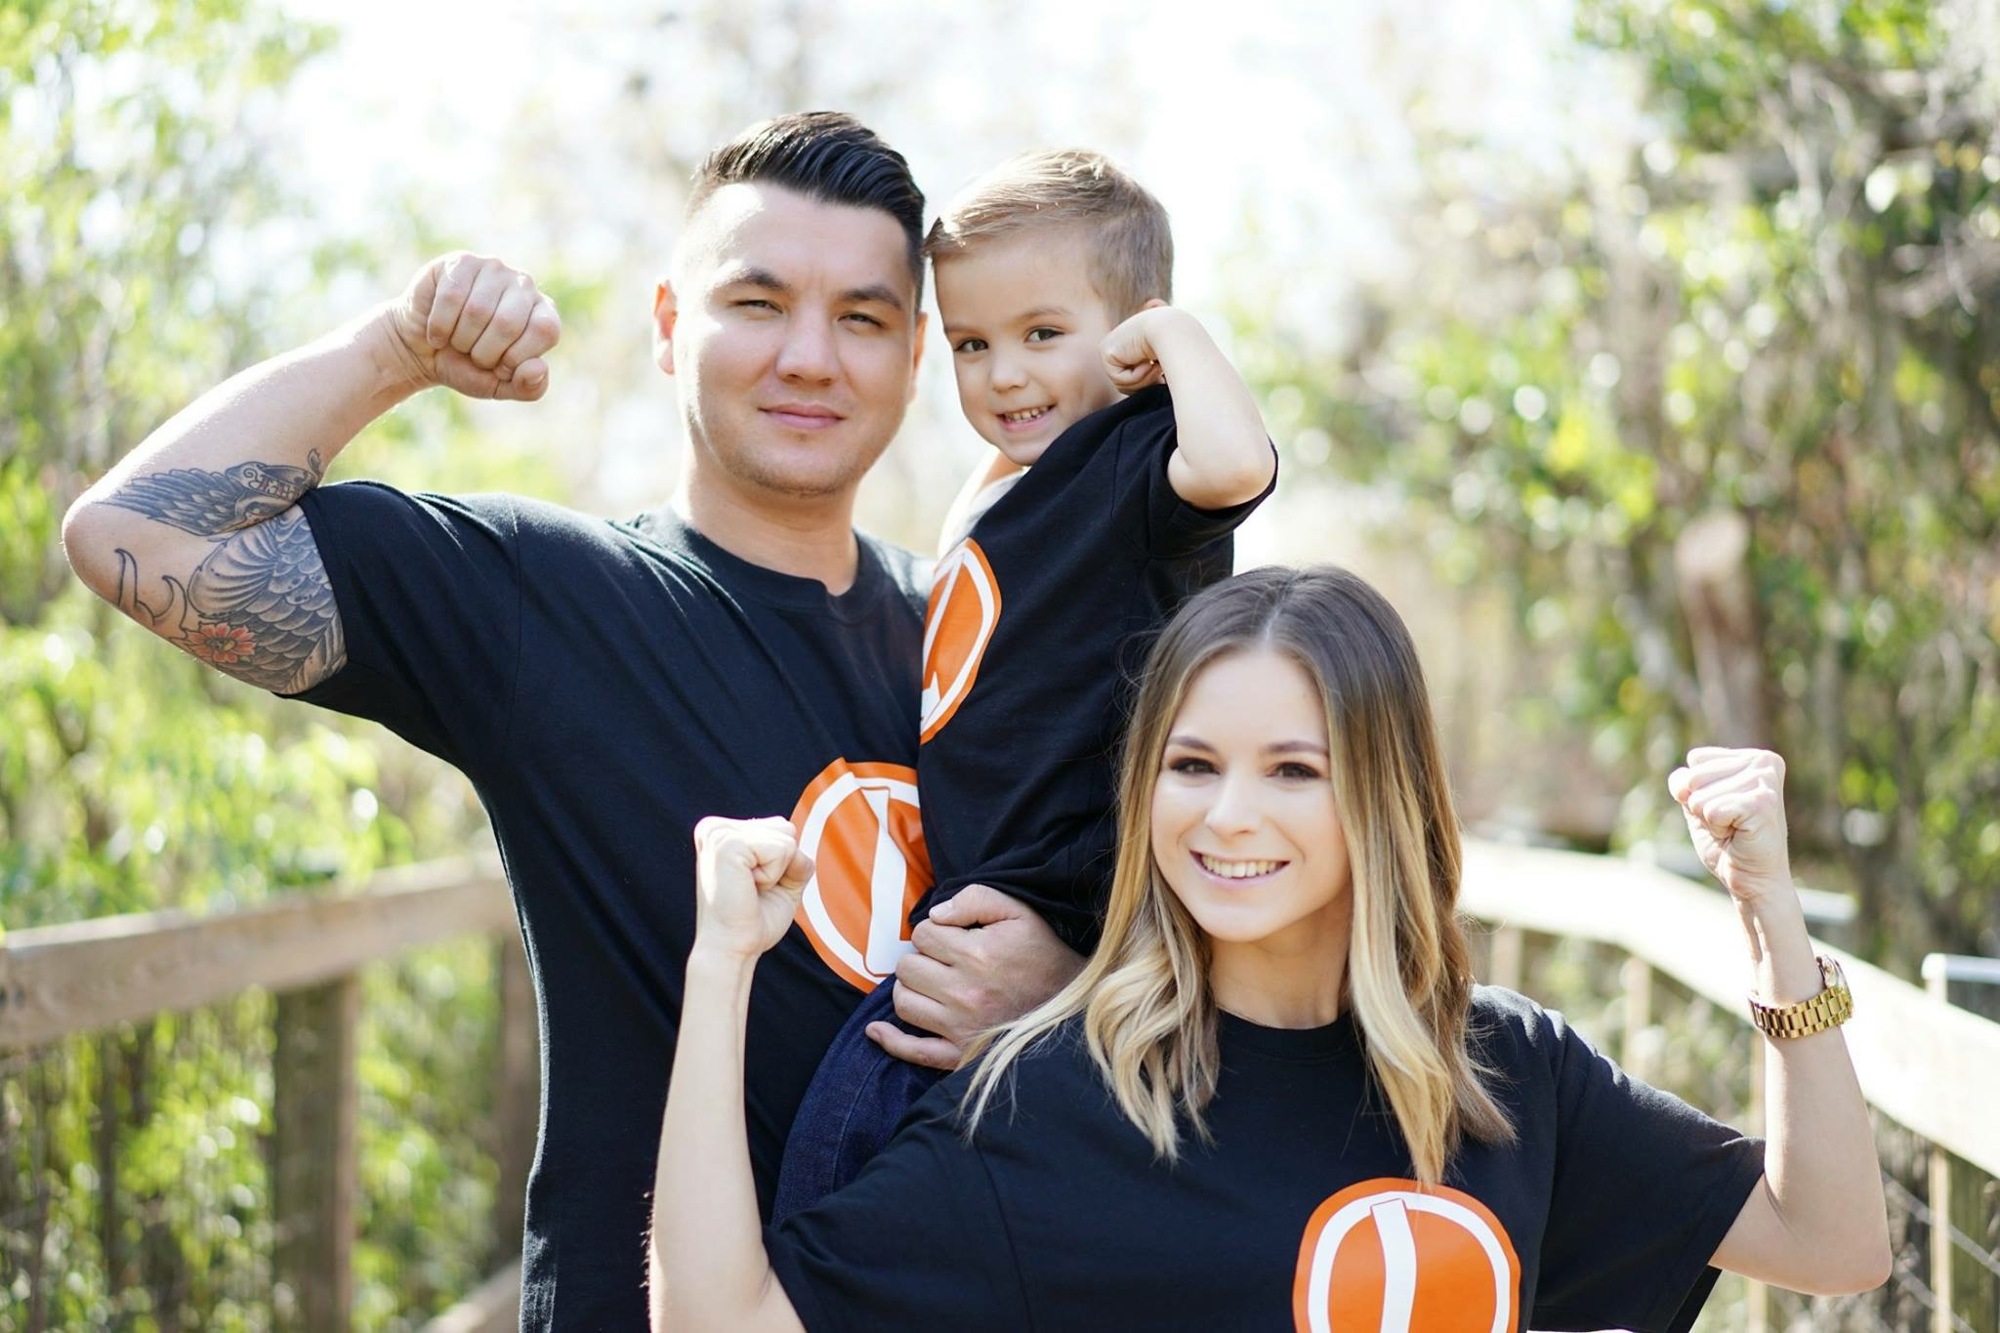 Landon Bliven and his parents, Tommy Bliven and Brittany Snipes, sport Team Landon T-shirts. Photos by Samantha Rhodes